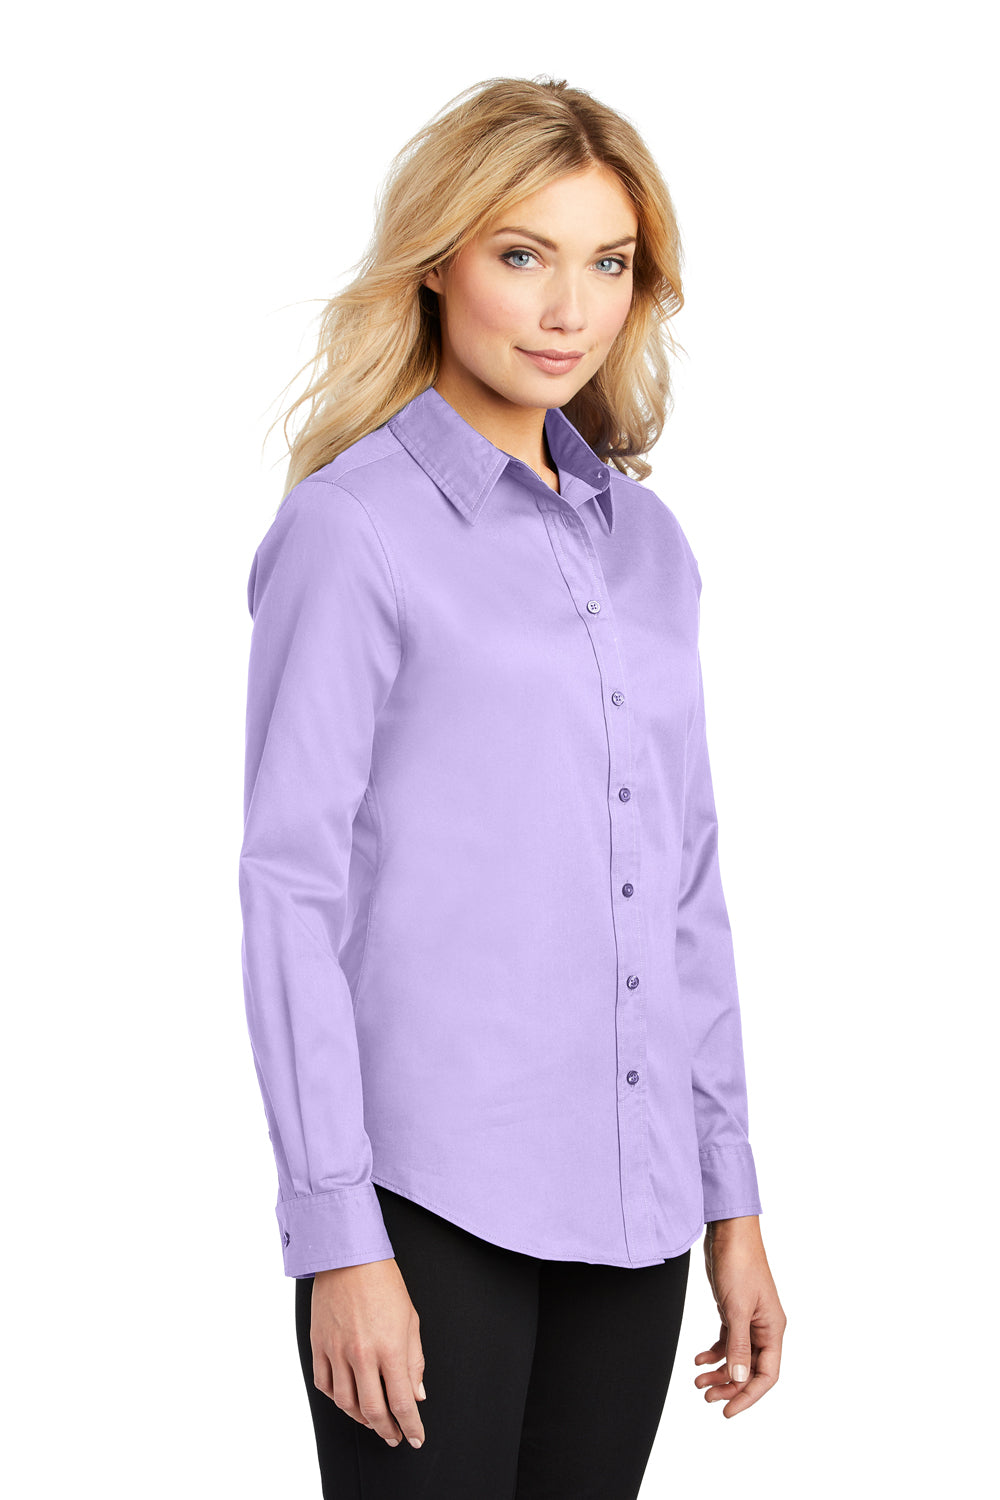 Port Authority L608 Womens Easy Care Wrinkle Resistant Long Sleeve Button Down Shirt Bright Lavender Purple 3Q